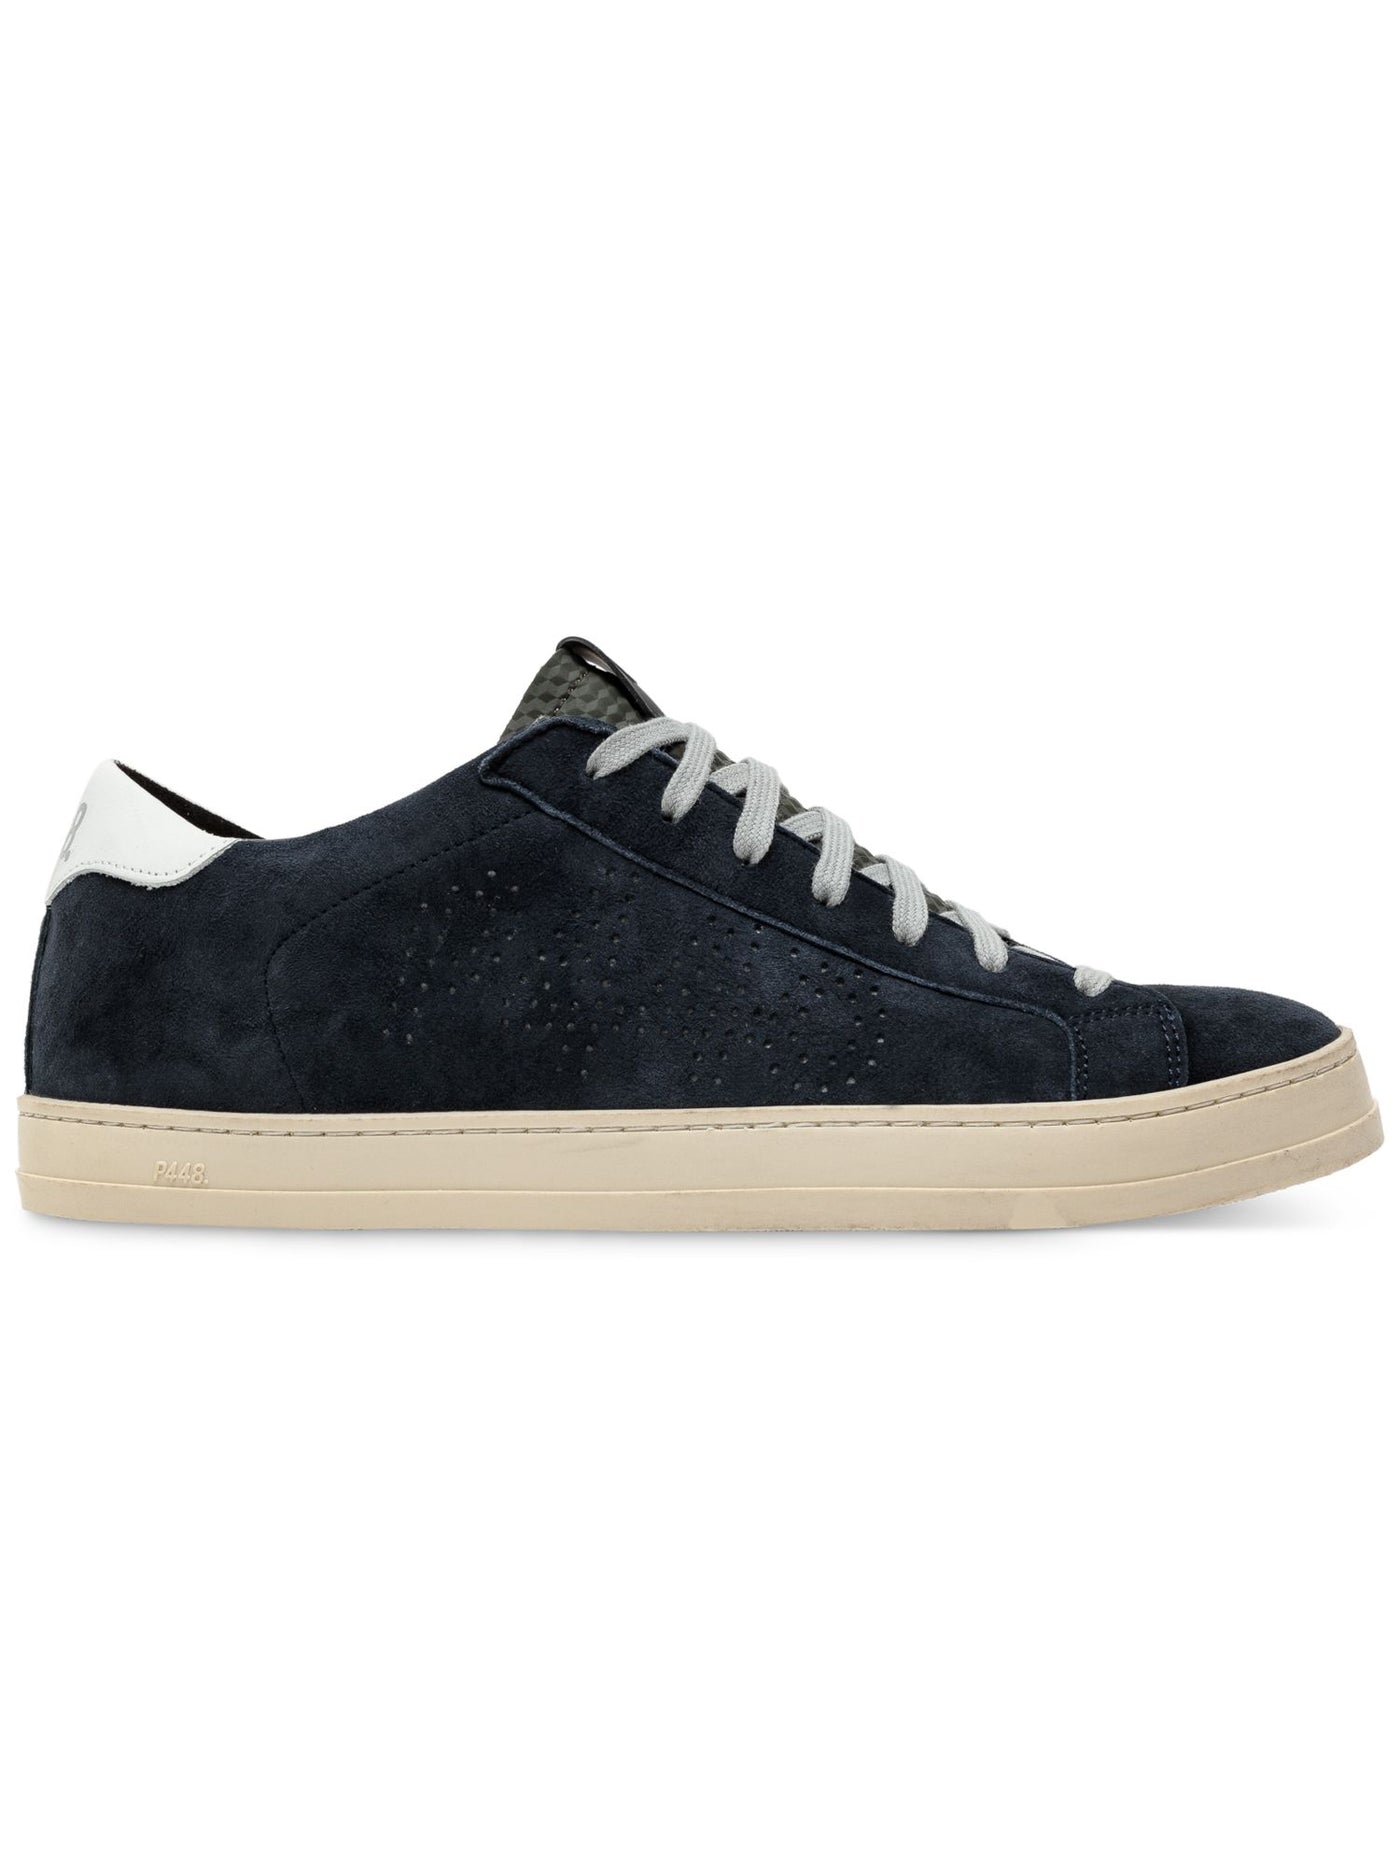 P448 Mens Navy Perforated Padded John Round Toe Platform Lace-Up Leather Sneakers Shoes 43